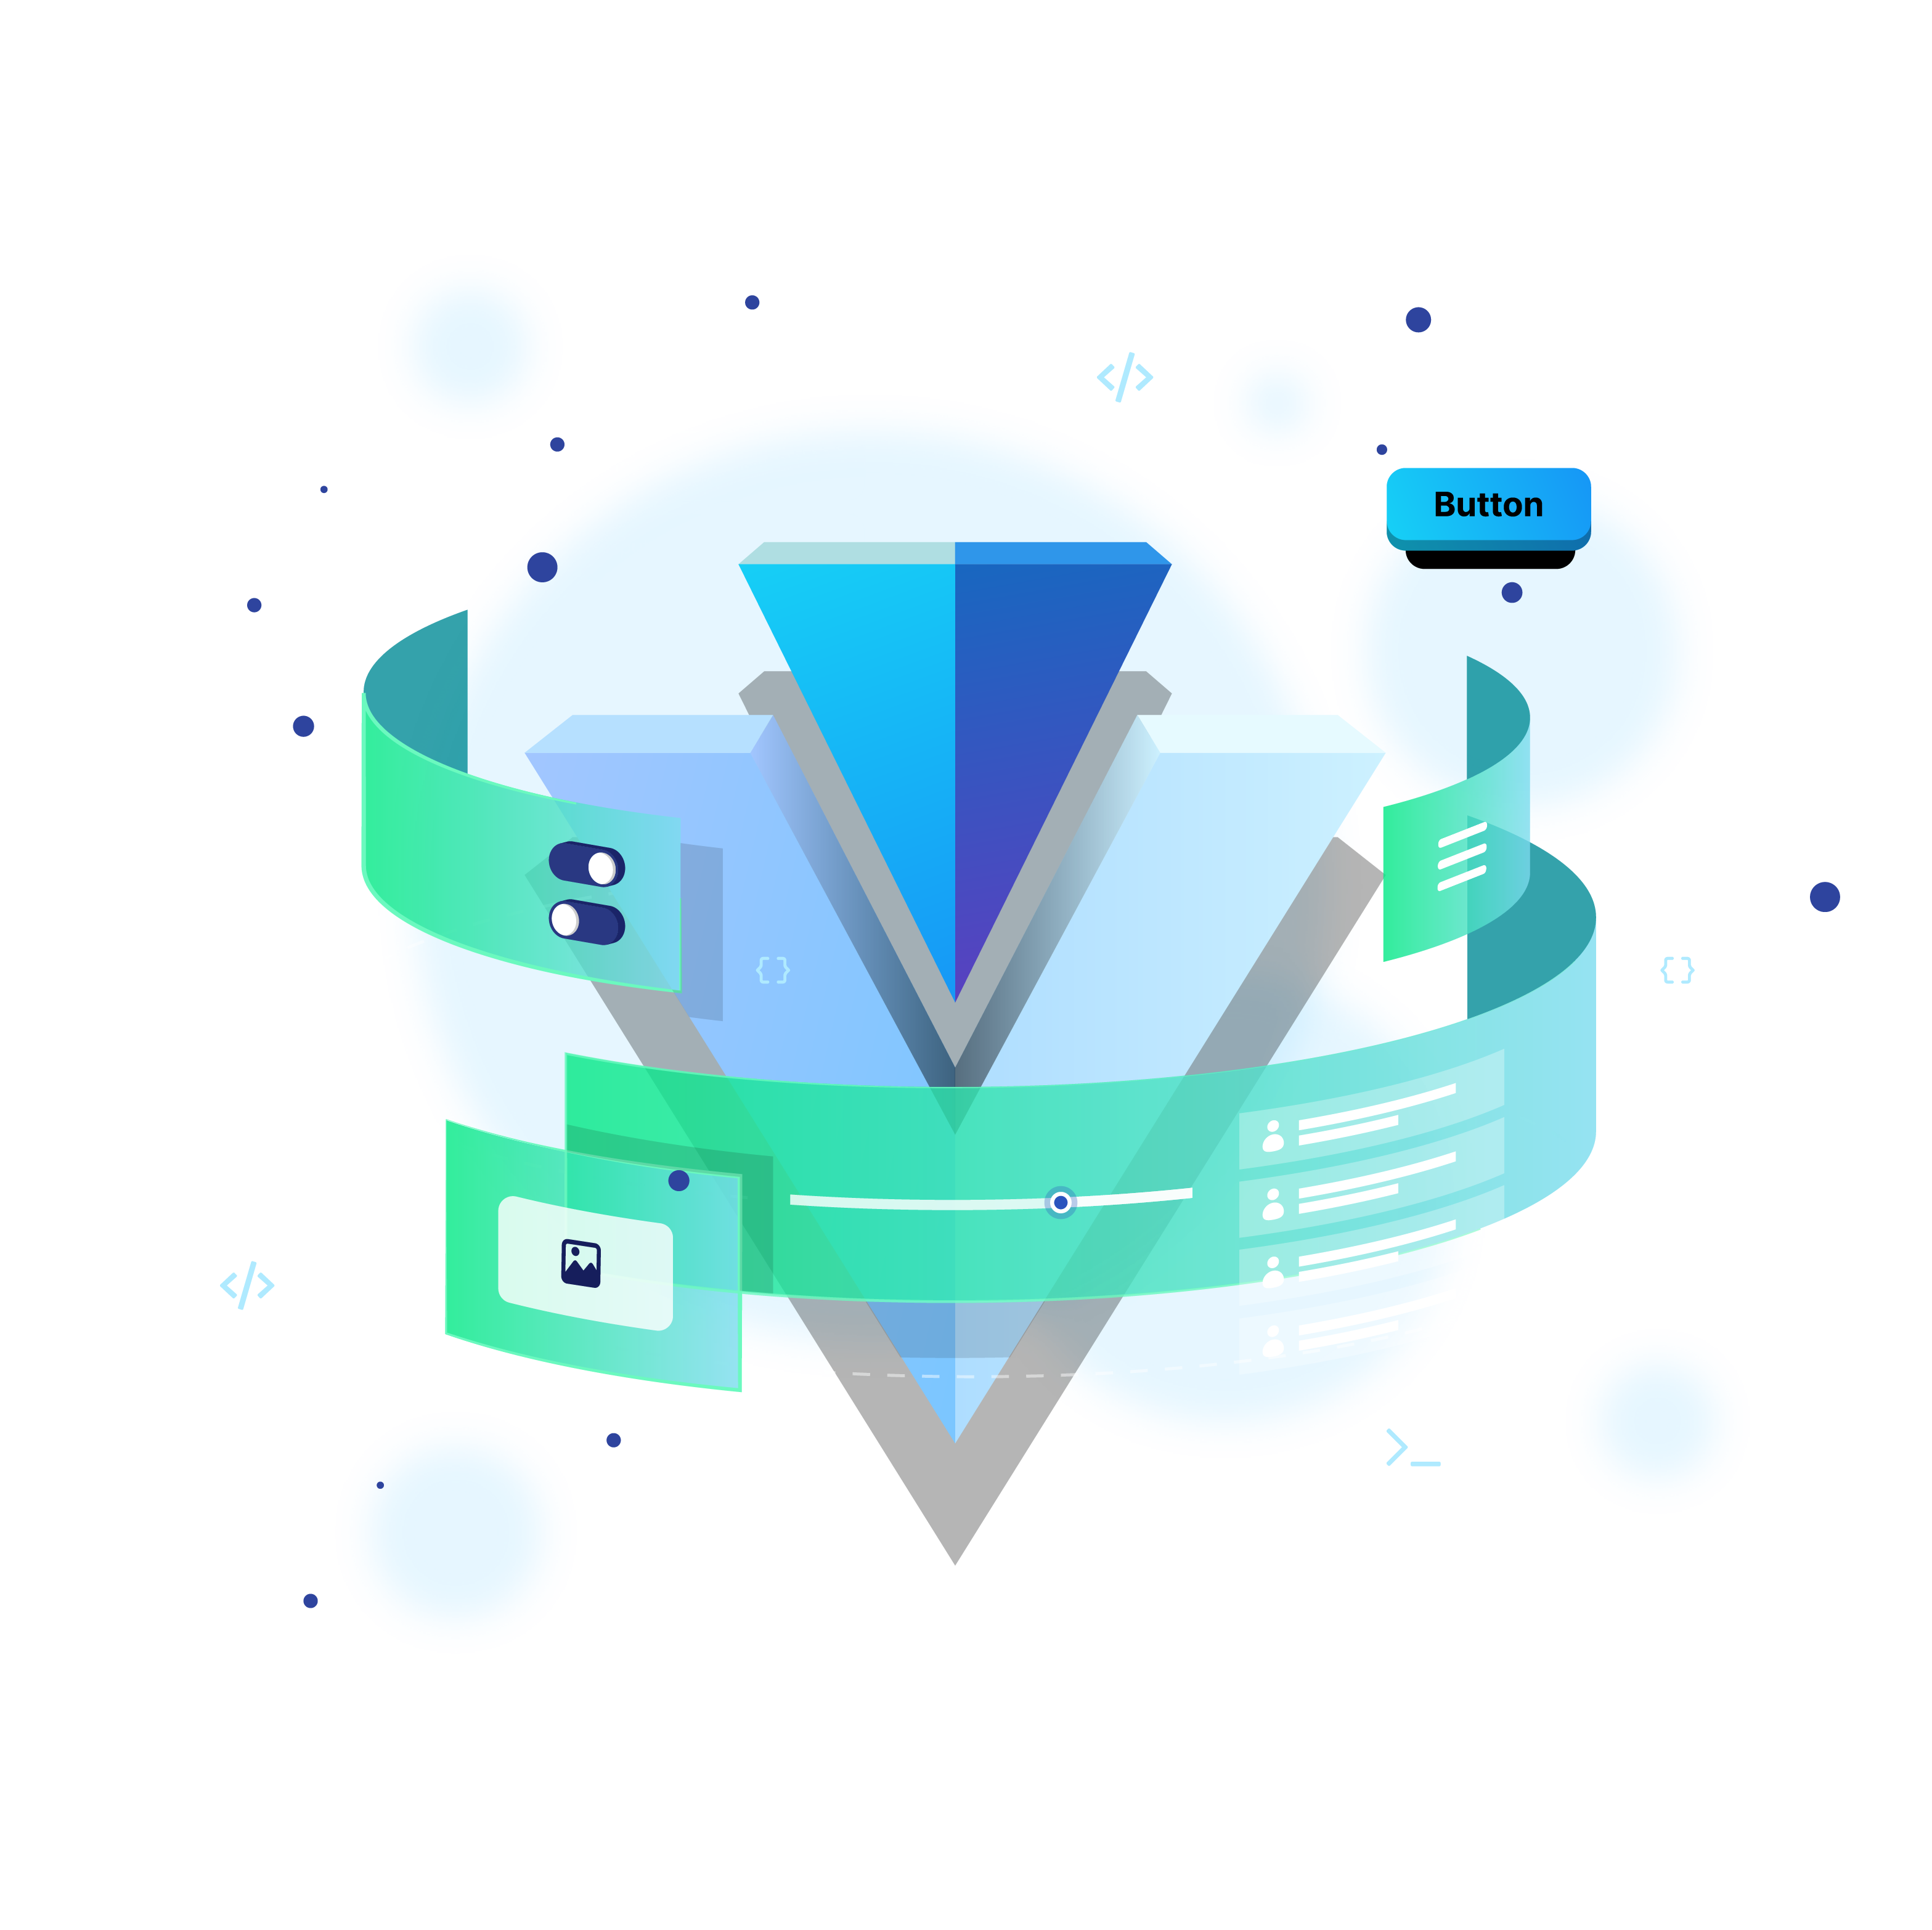 Illustration image of Material UI with Vuetify and Vue.js